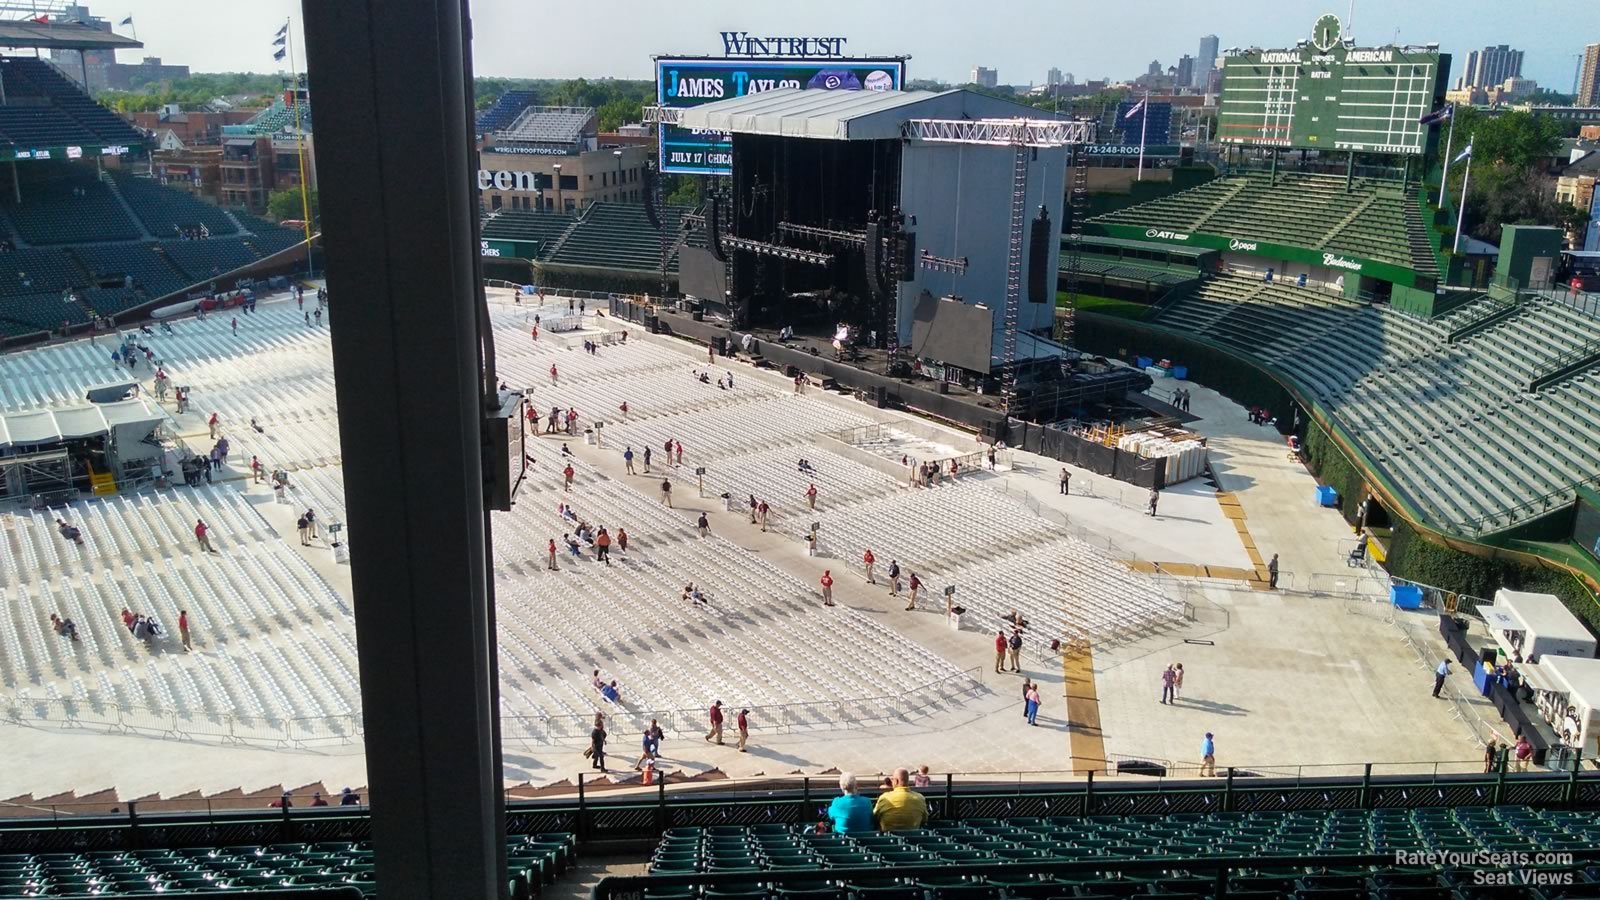 section 429, row 4 seat view  for concert - wrigley field